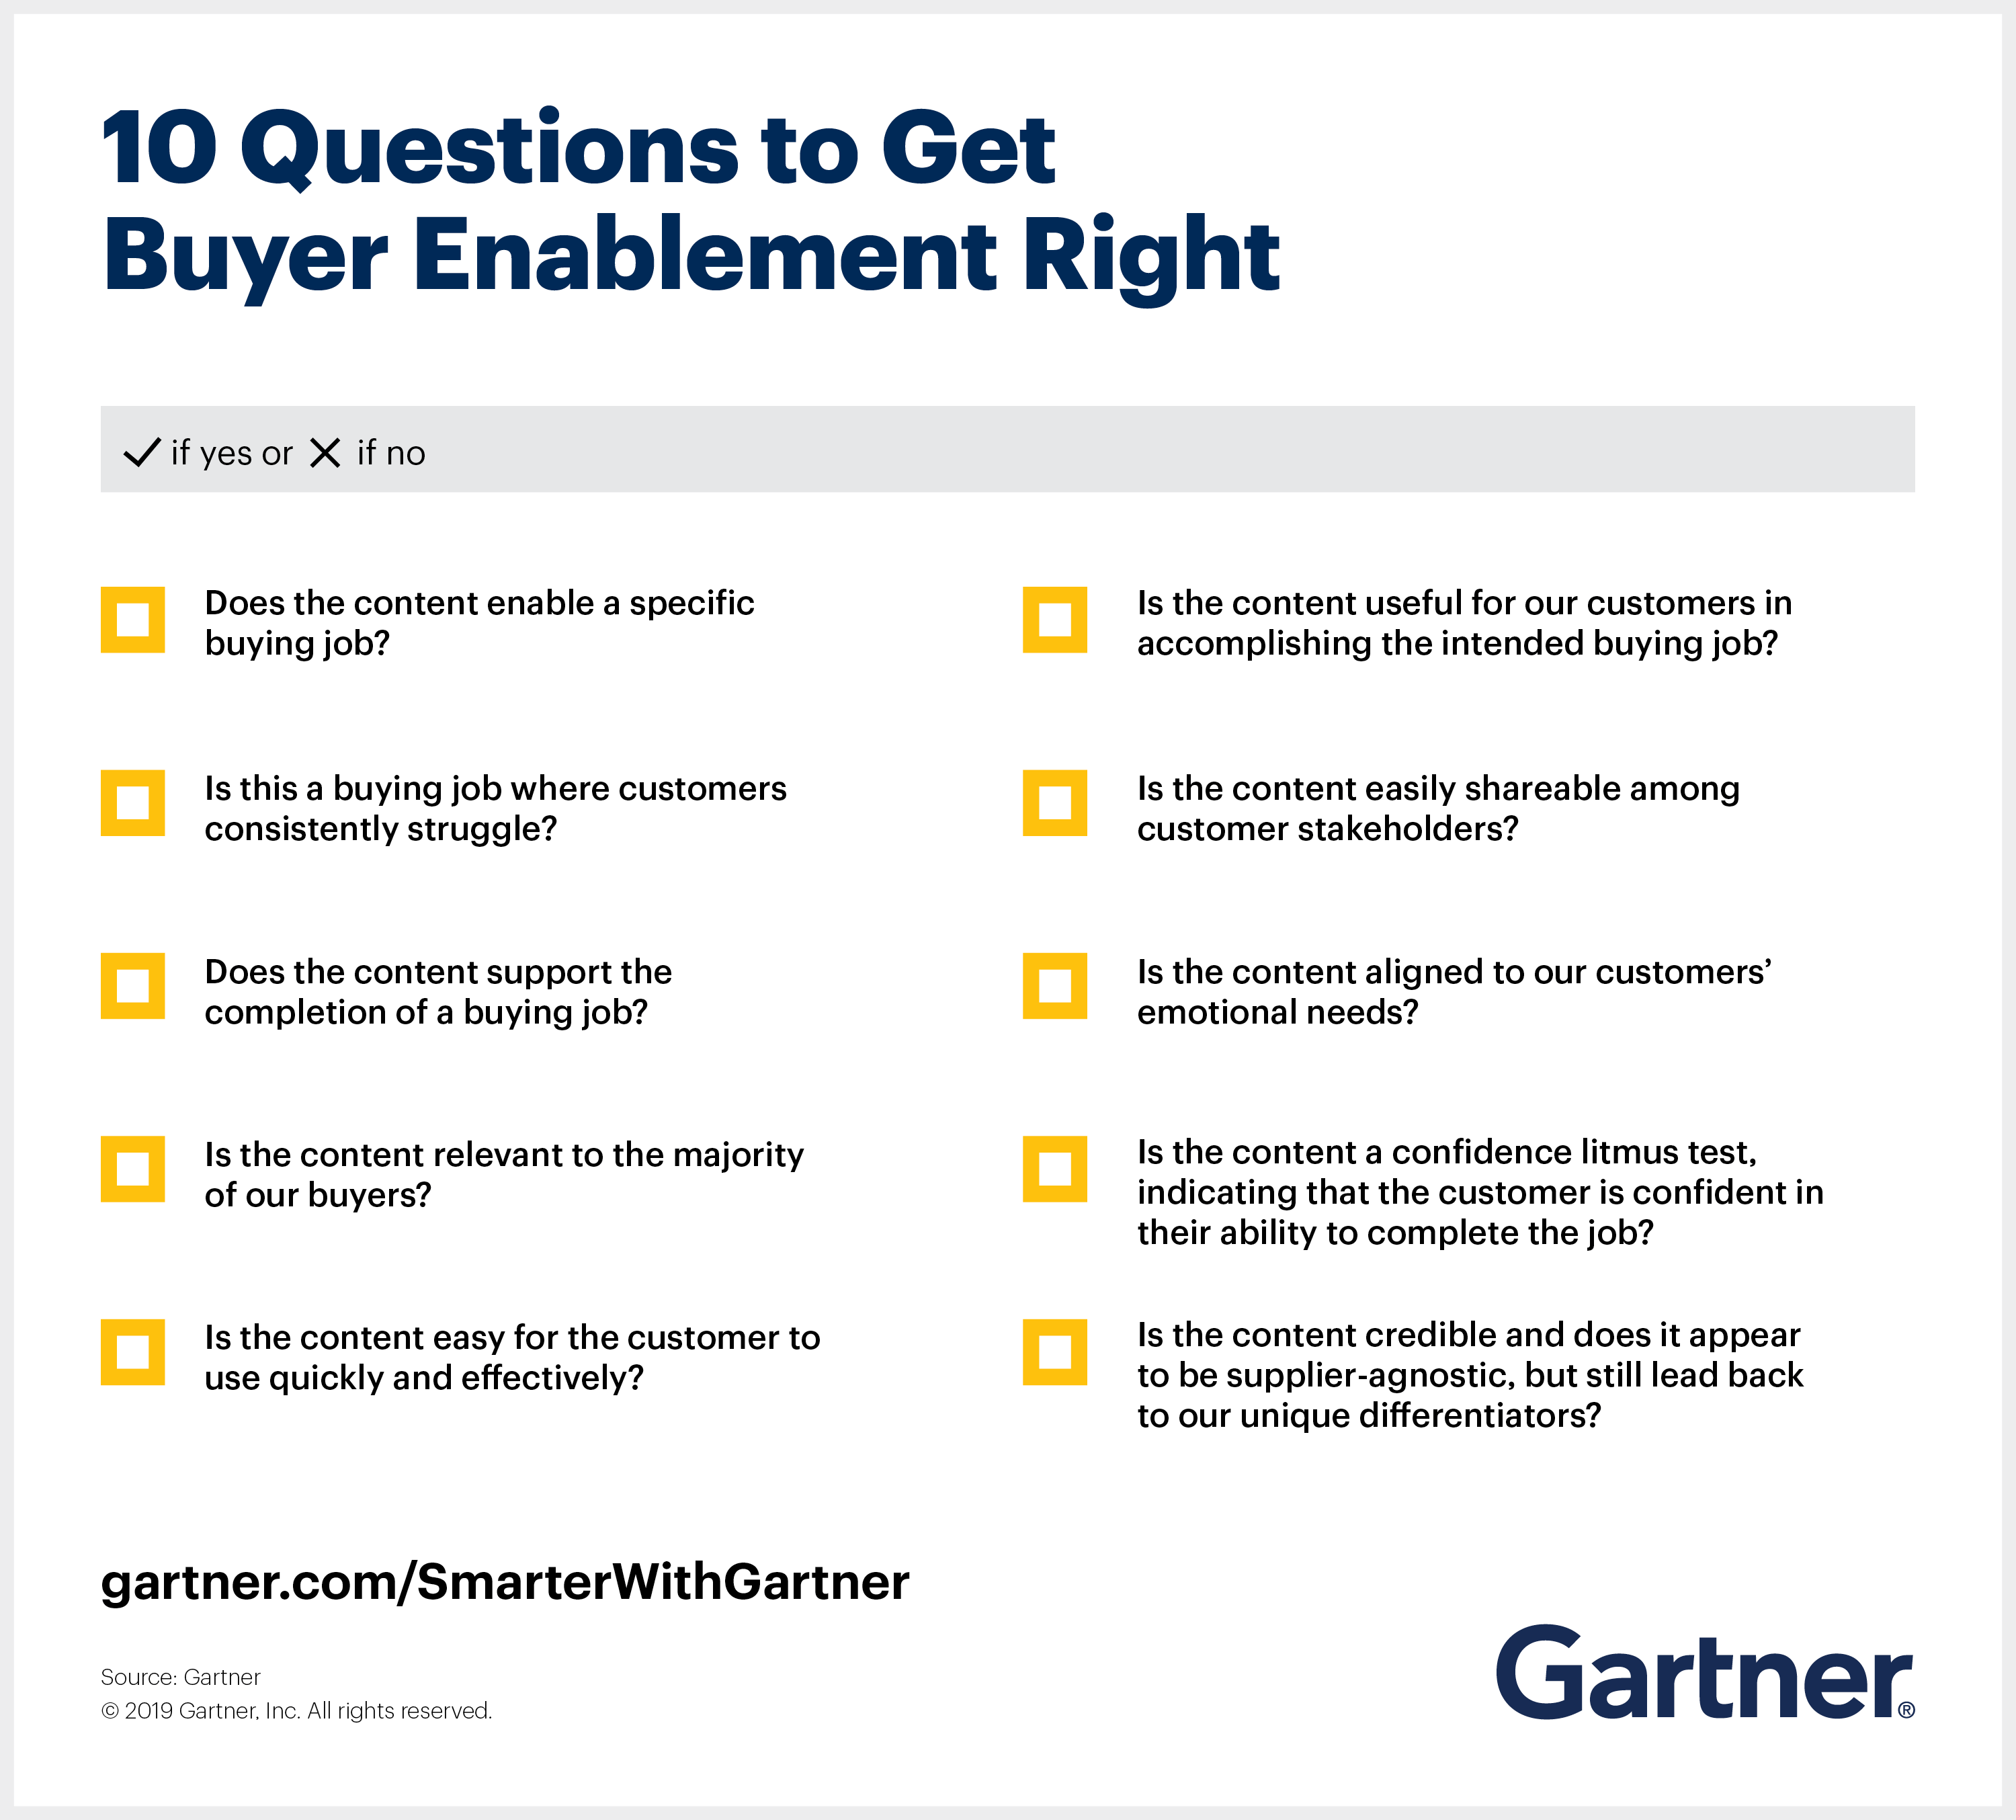 The Gartner 10-question buyer enablement content checklist helps marketers ensure the effectiveness of their content marketing.